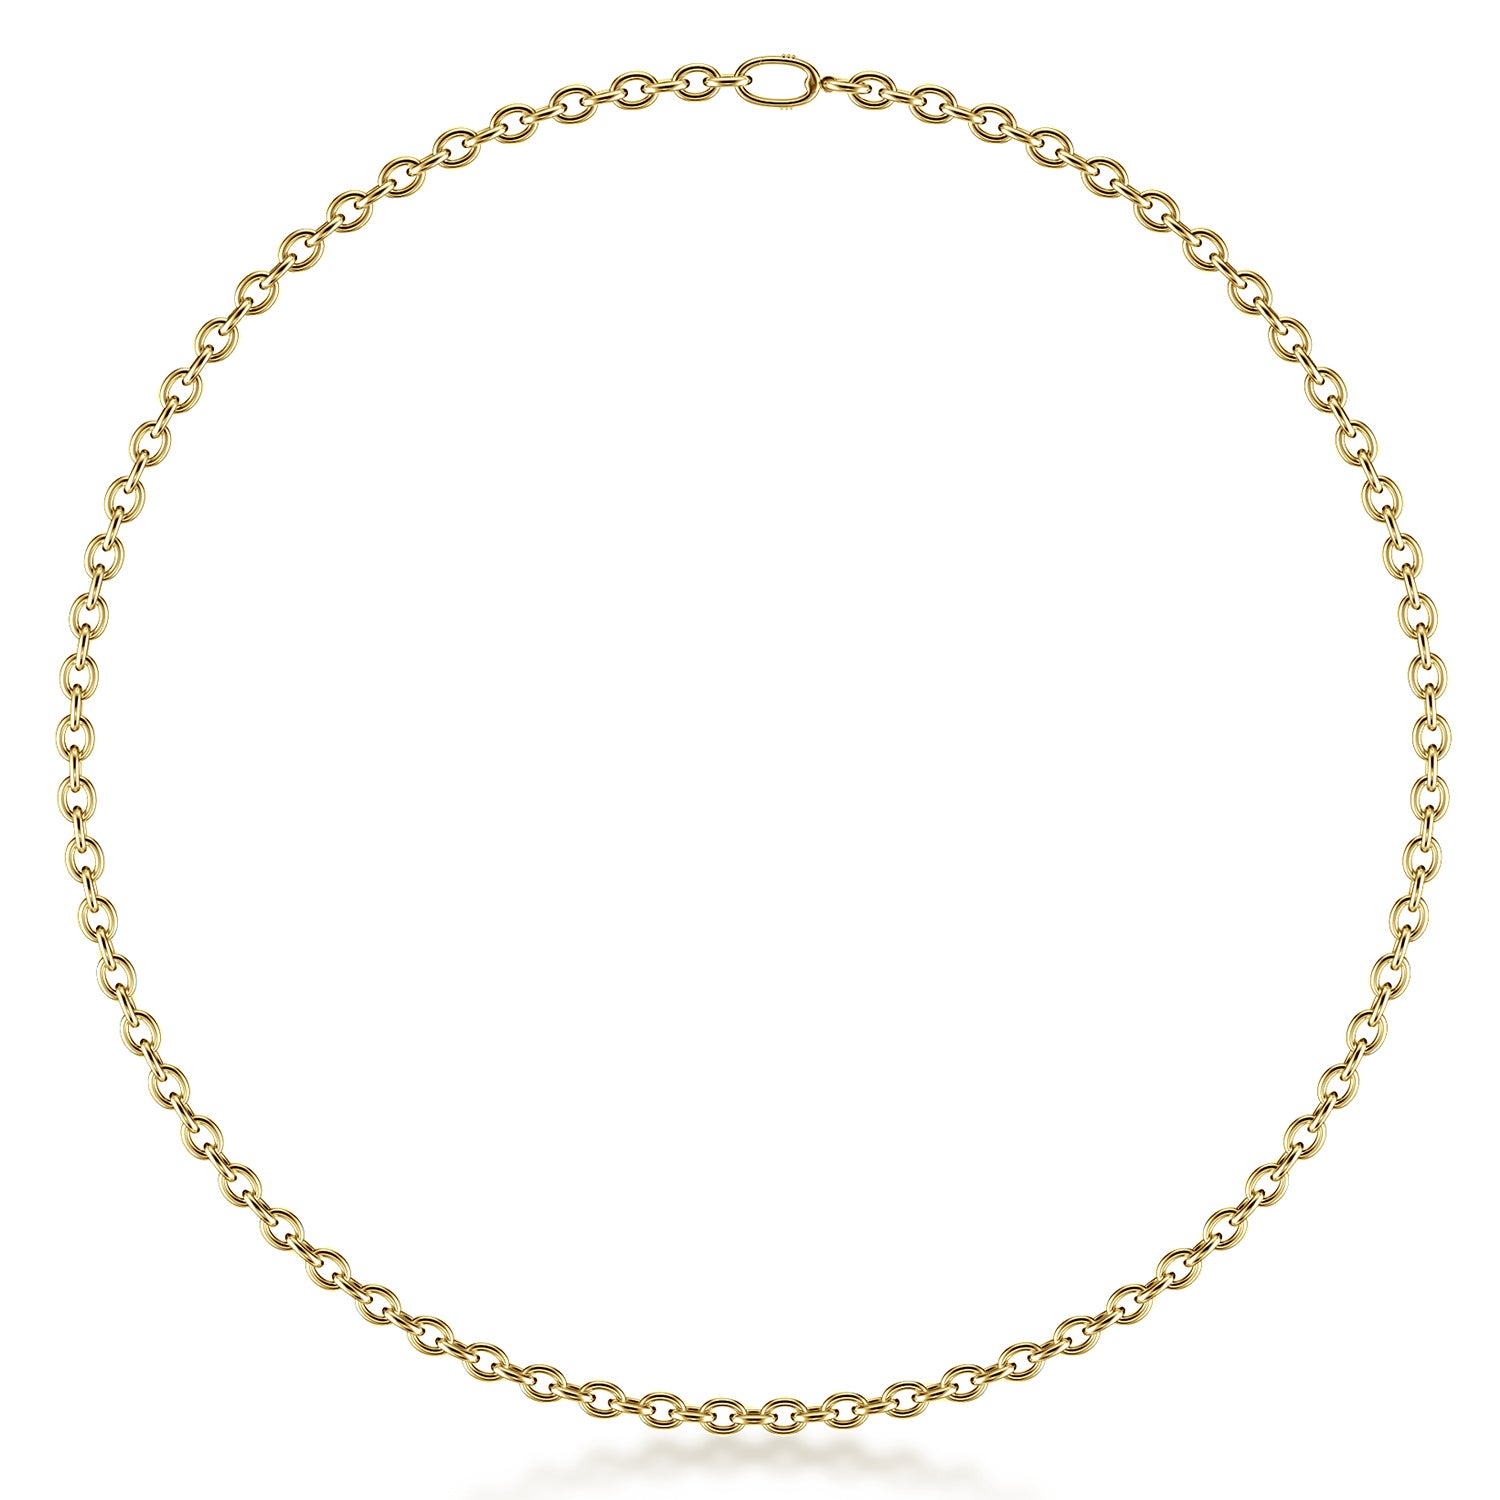 LUXE LINK GOLD NECKLACE